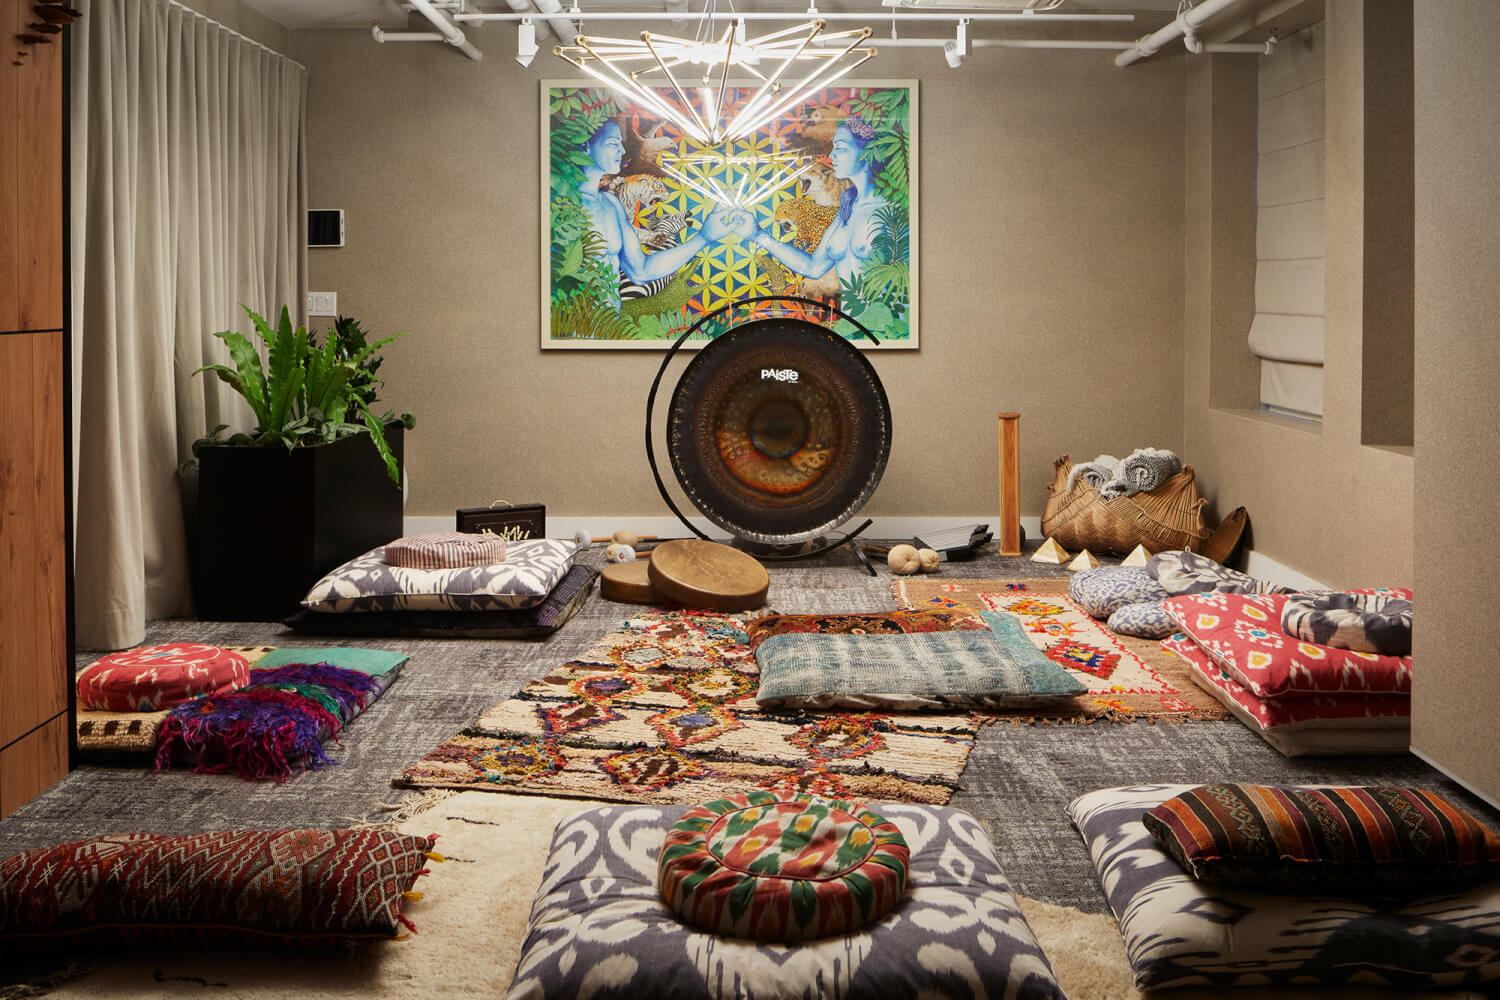 Assemblage, a Zen Soho House, Highlighted in New York Times